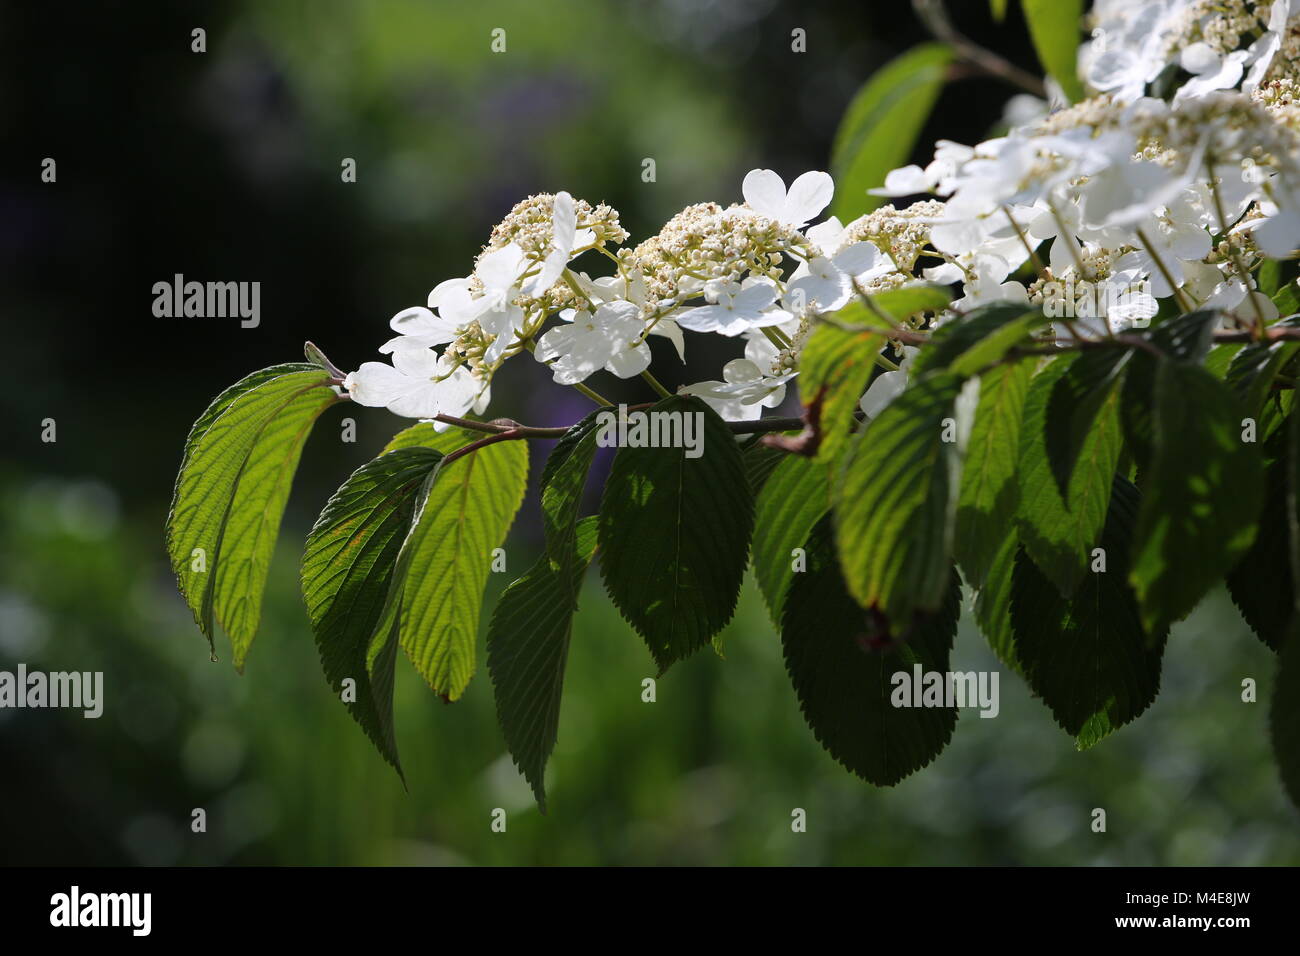 Japanese snowball, flowering plant in the garden Stock Photo